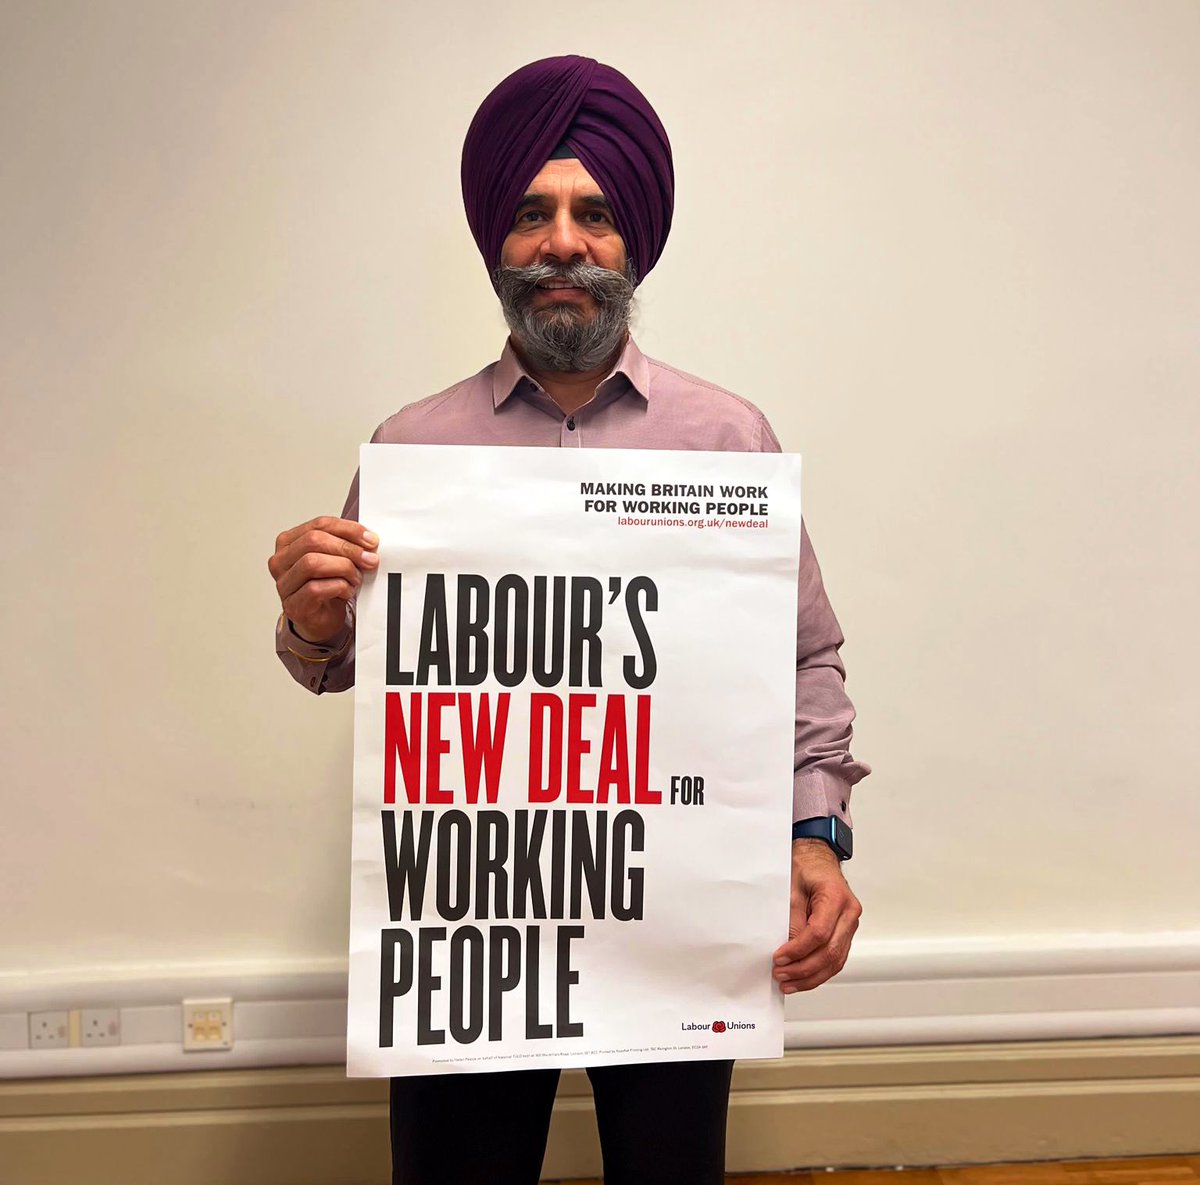 .@UKLabour’s New Deal for Working People will ensure that workers across Ilford South have the rights & security they deserve in the workplace. These are radical, transformative policies that will help end exploitative practices & break down barriers to opportunity